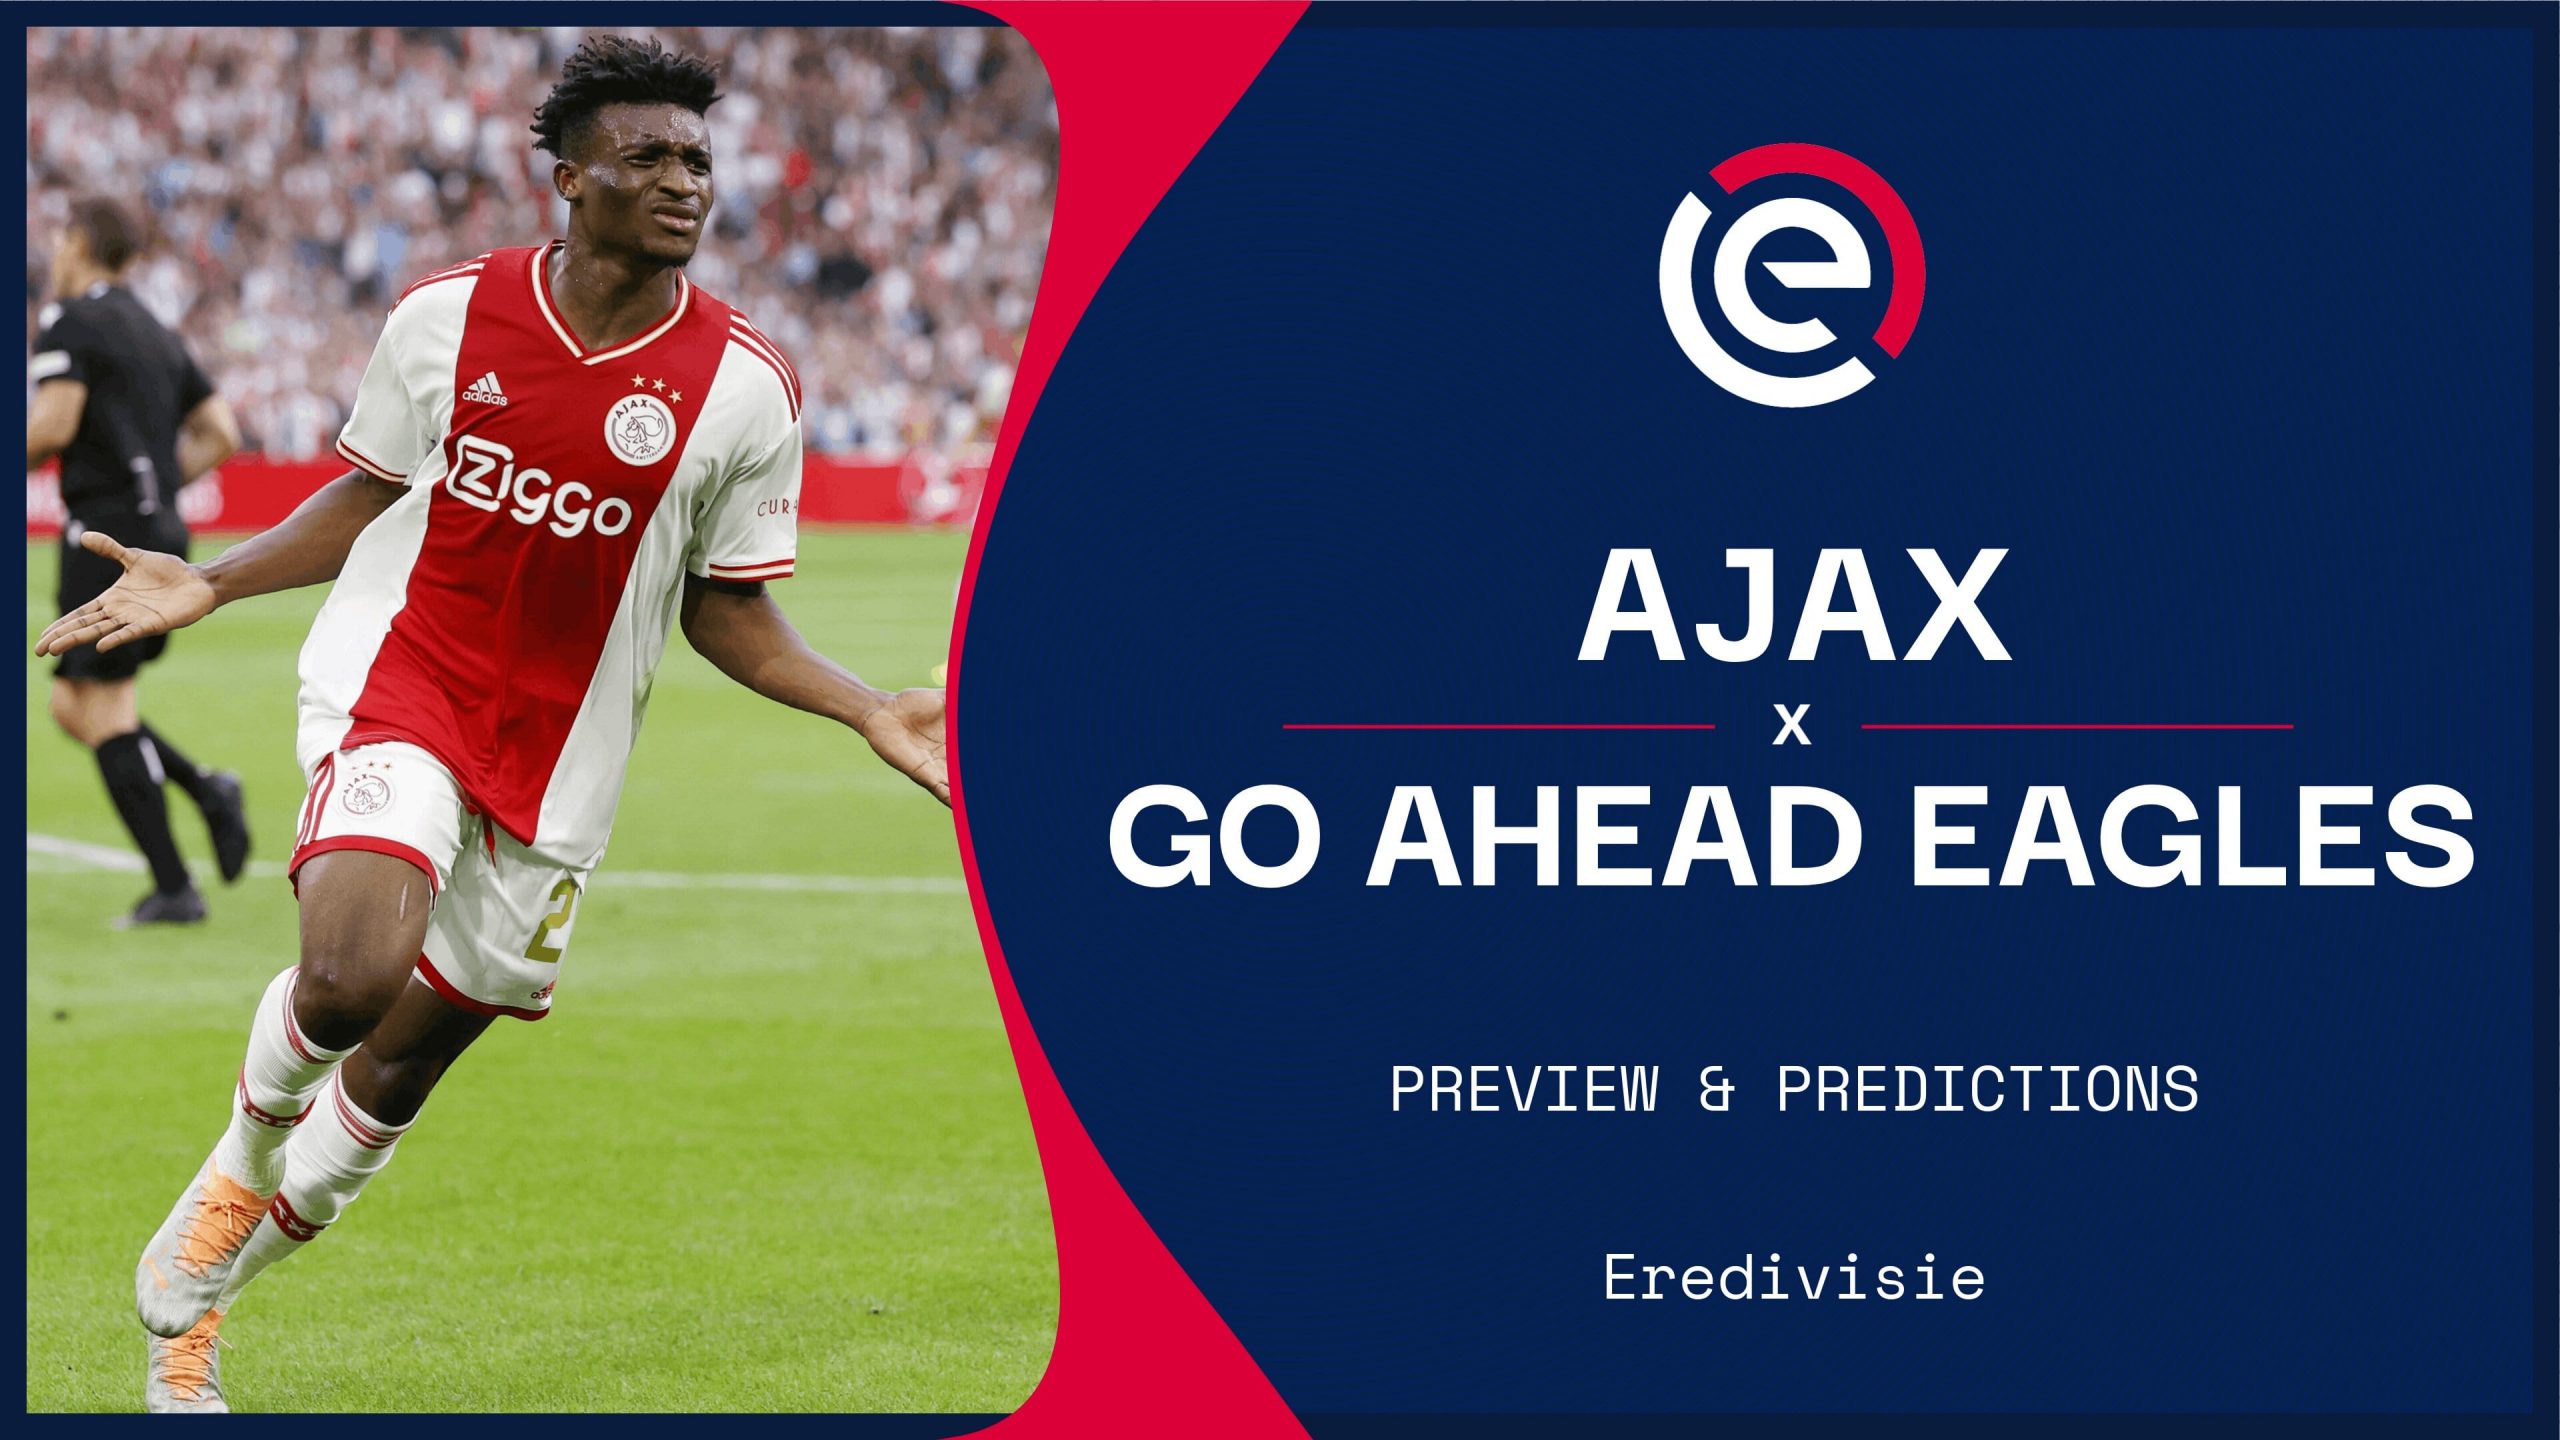 Ajax v Go Ahead Eagles live stream: How to watch Eredivisie online